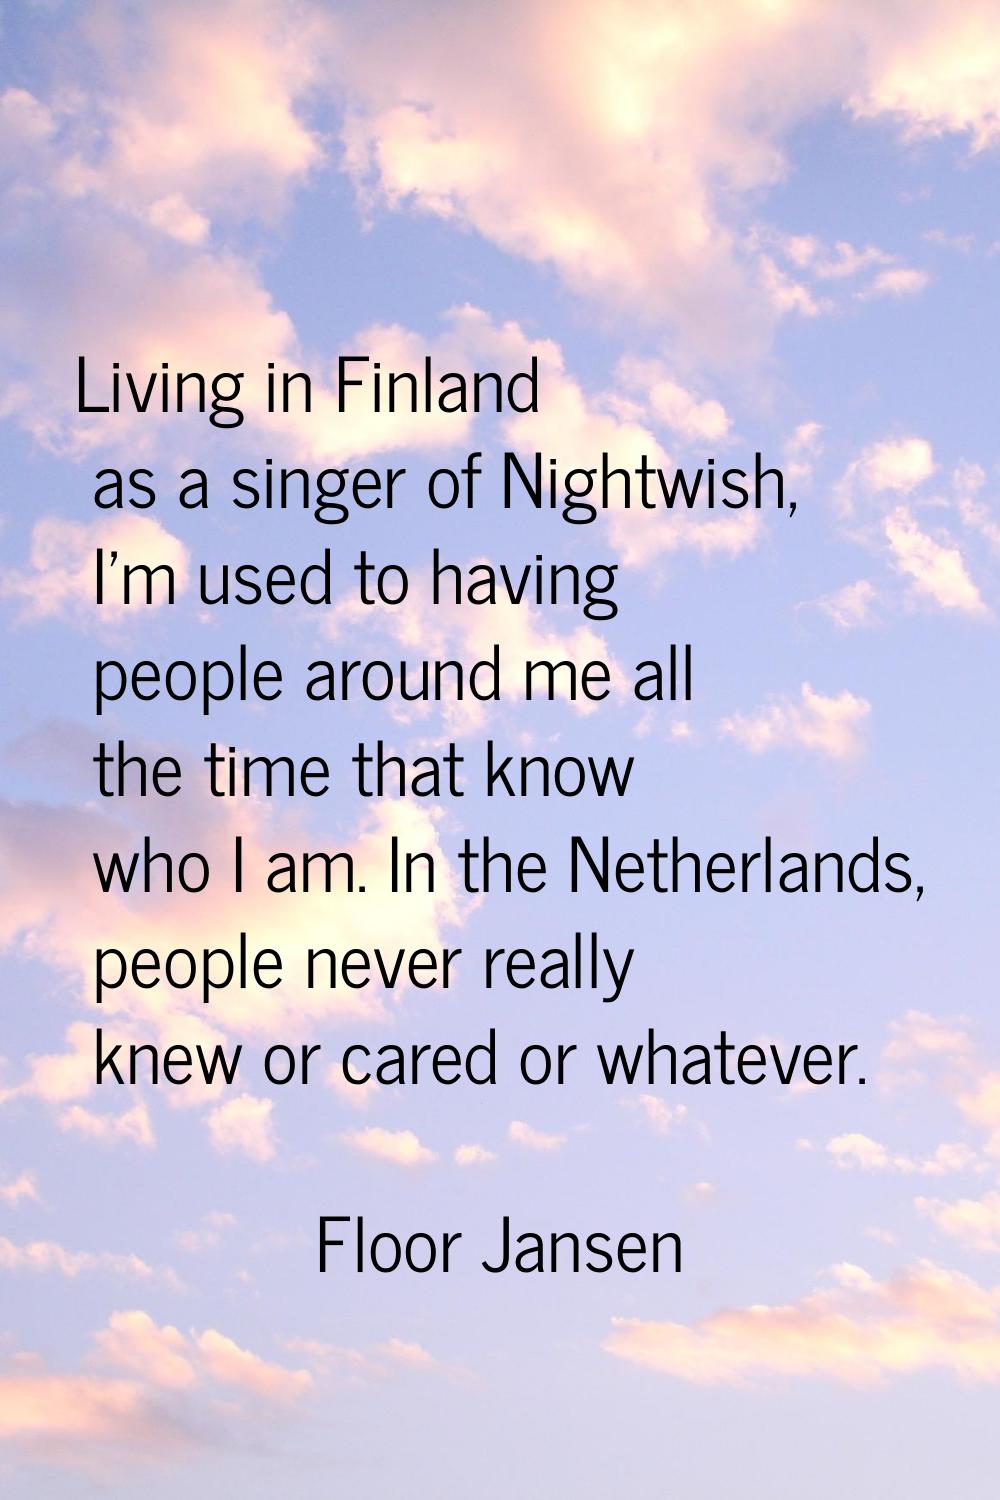 Living in Finland as a singer of Nightwish, I'm used to having people around me all the time that k